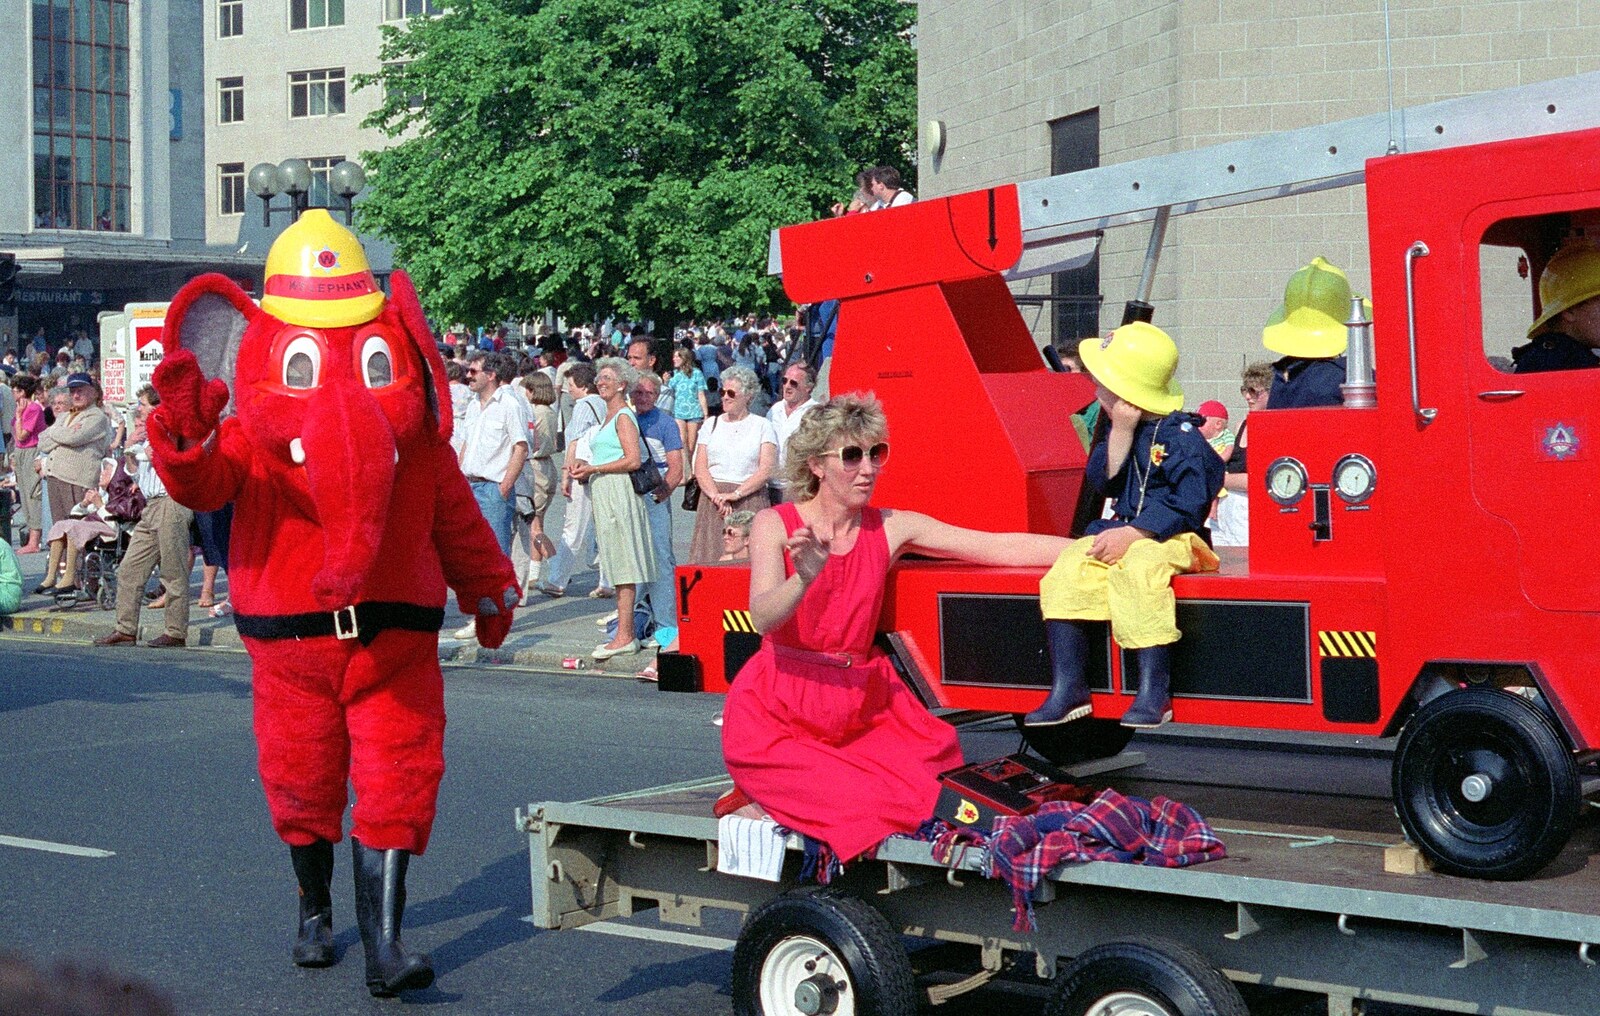 The Fire Service 'Wellephant' from Chantal and Andy's Wedding, and the Lord Mayor's Parade, Plymouth - 20th May 1987